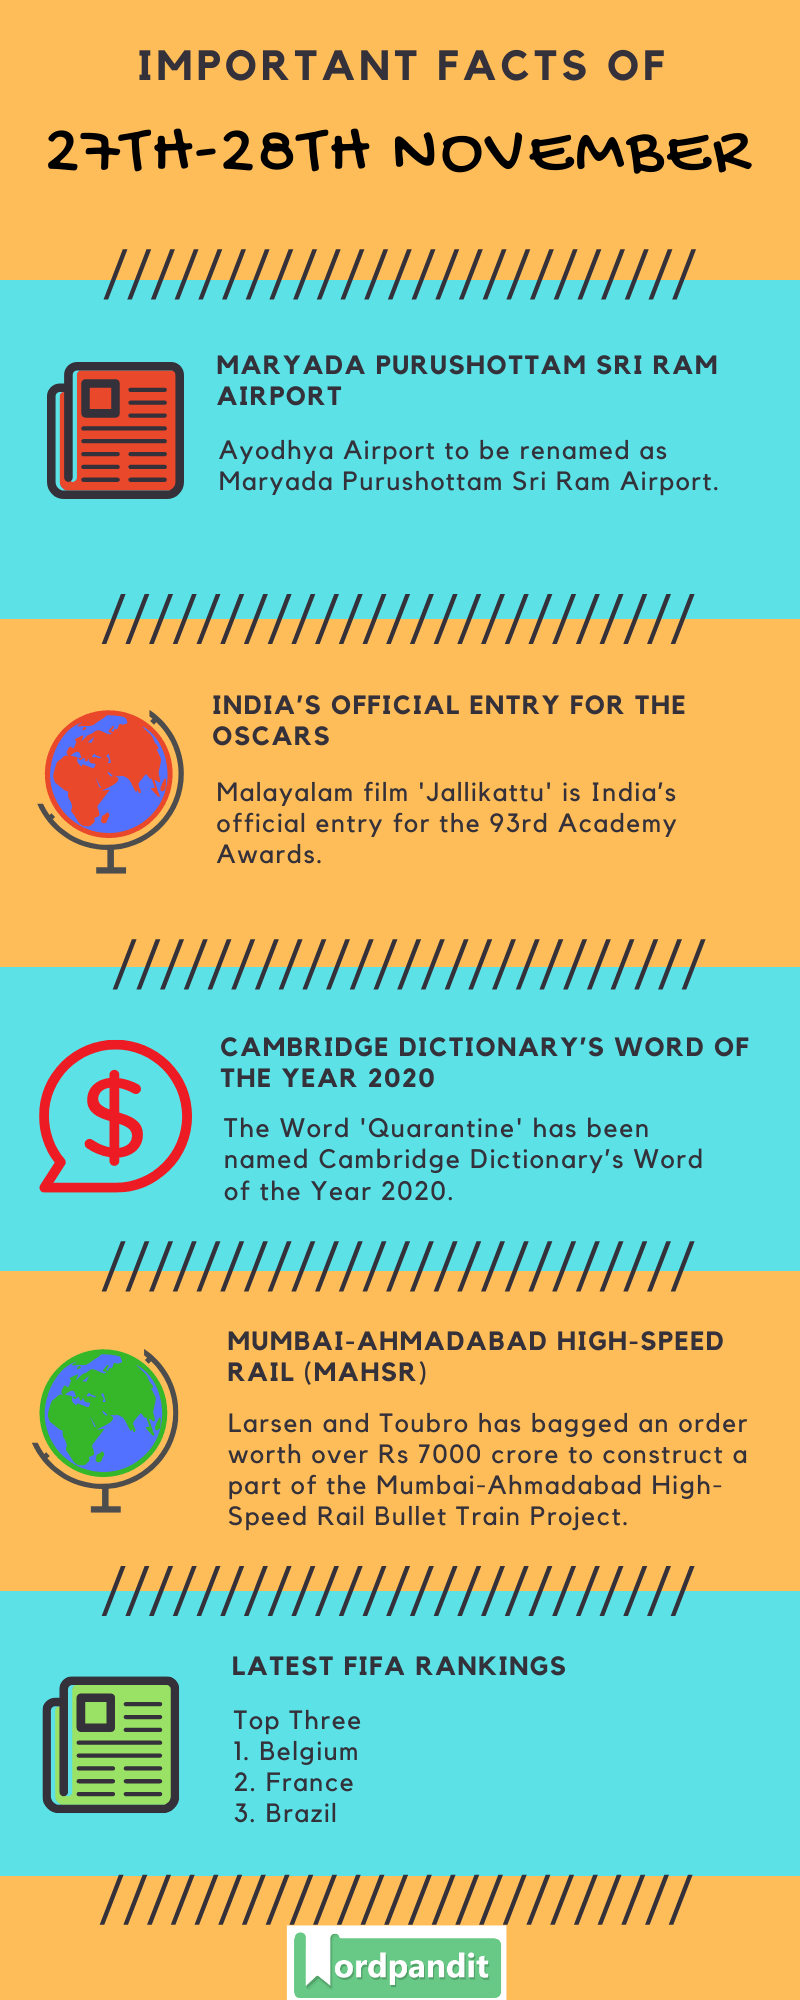 Daily Current Affairs 27th-28th November 2020 Current Affairs Quiz 27th-28th November 2020 Current Affairs Infographic